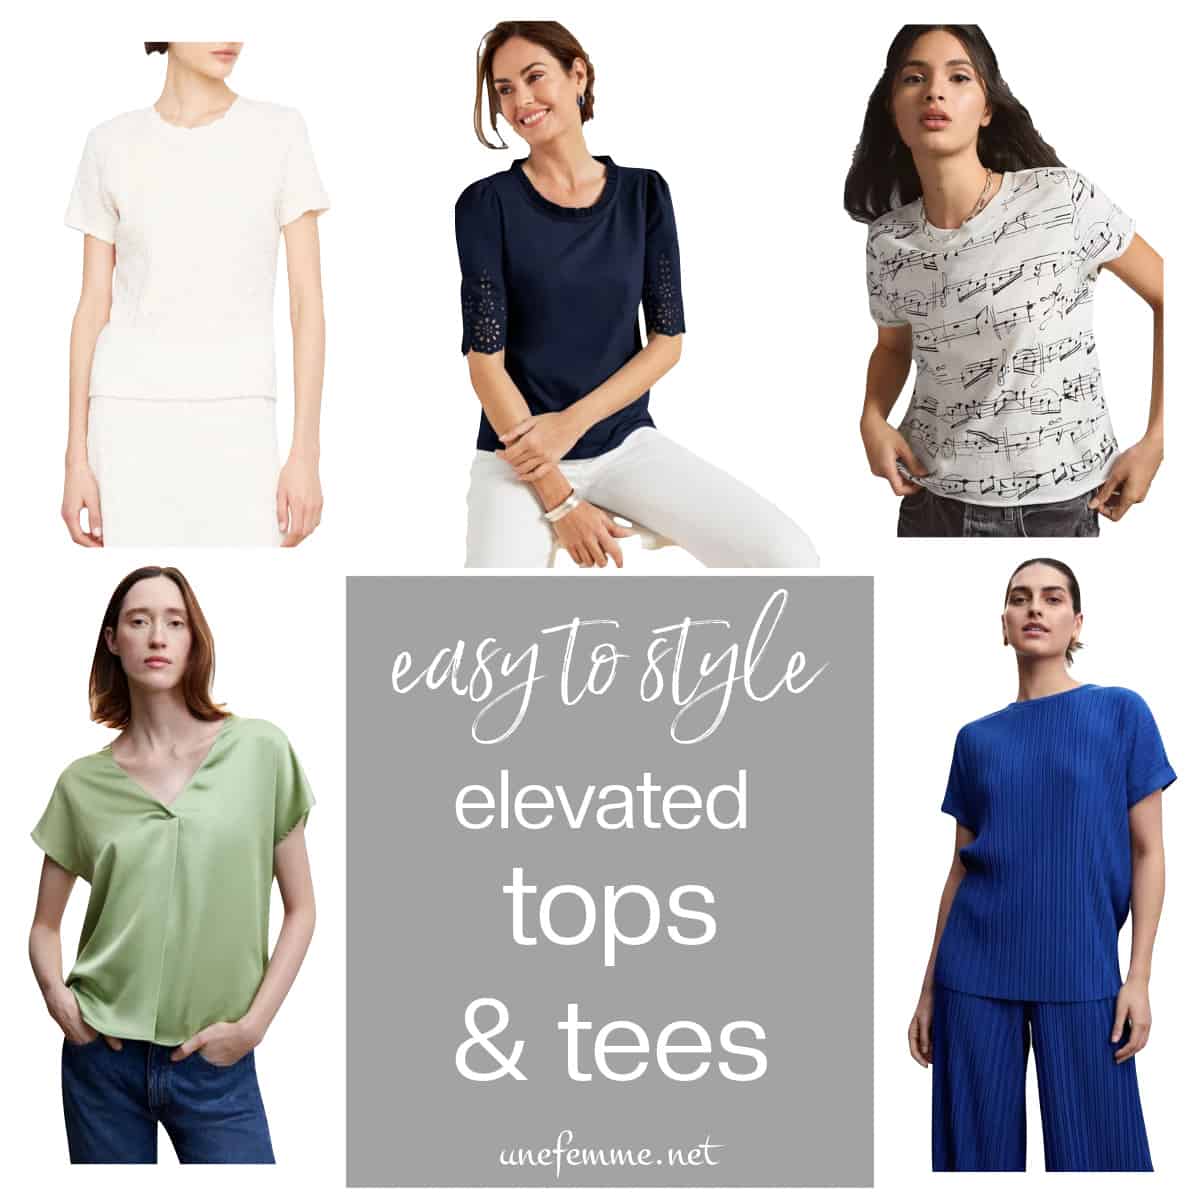 Refined tops that are as easy to style as a basic tee